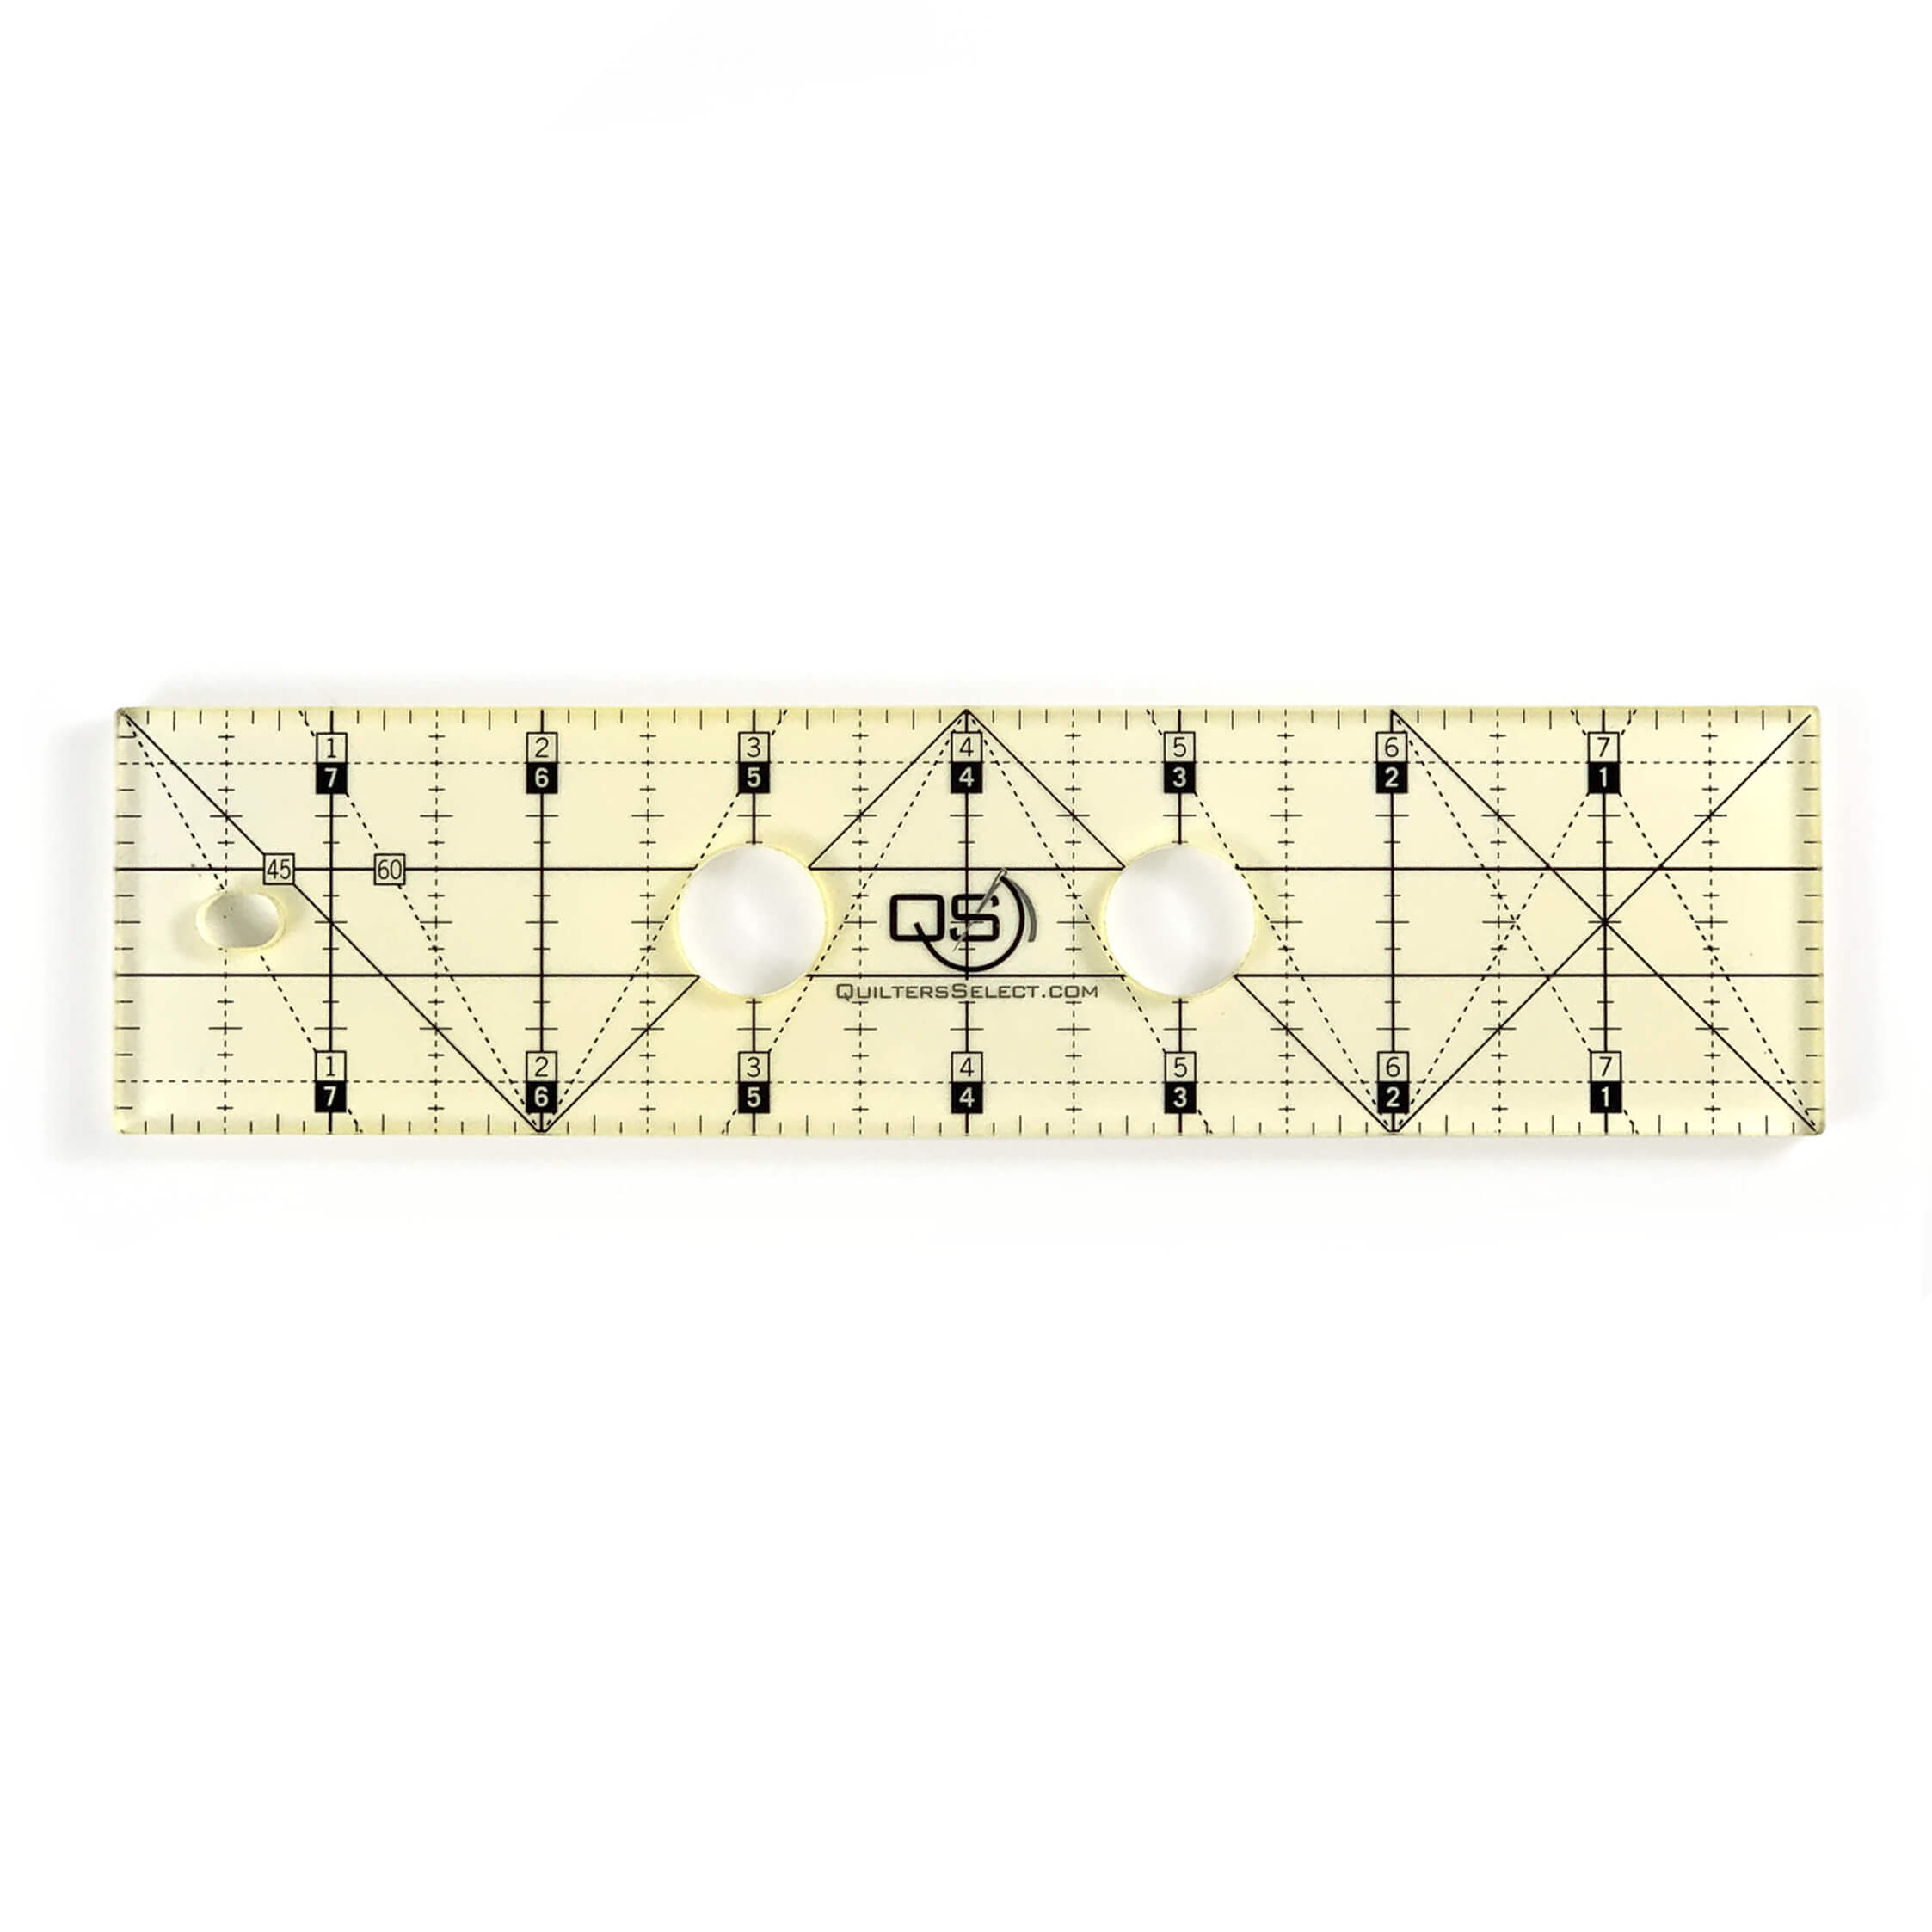 Cutting Ruler, QUILTER'S SELECT 2 1/2 x 12 ( Non-Slip Coating)